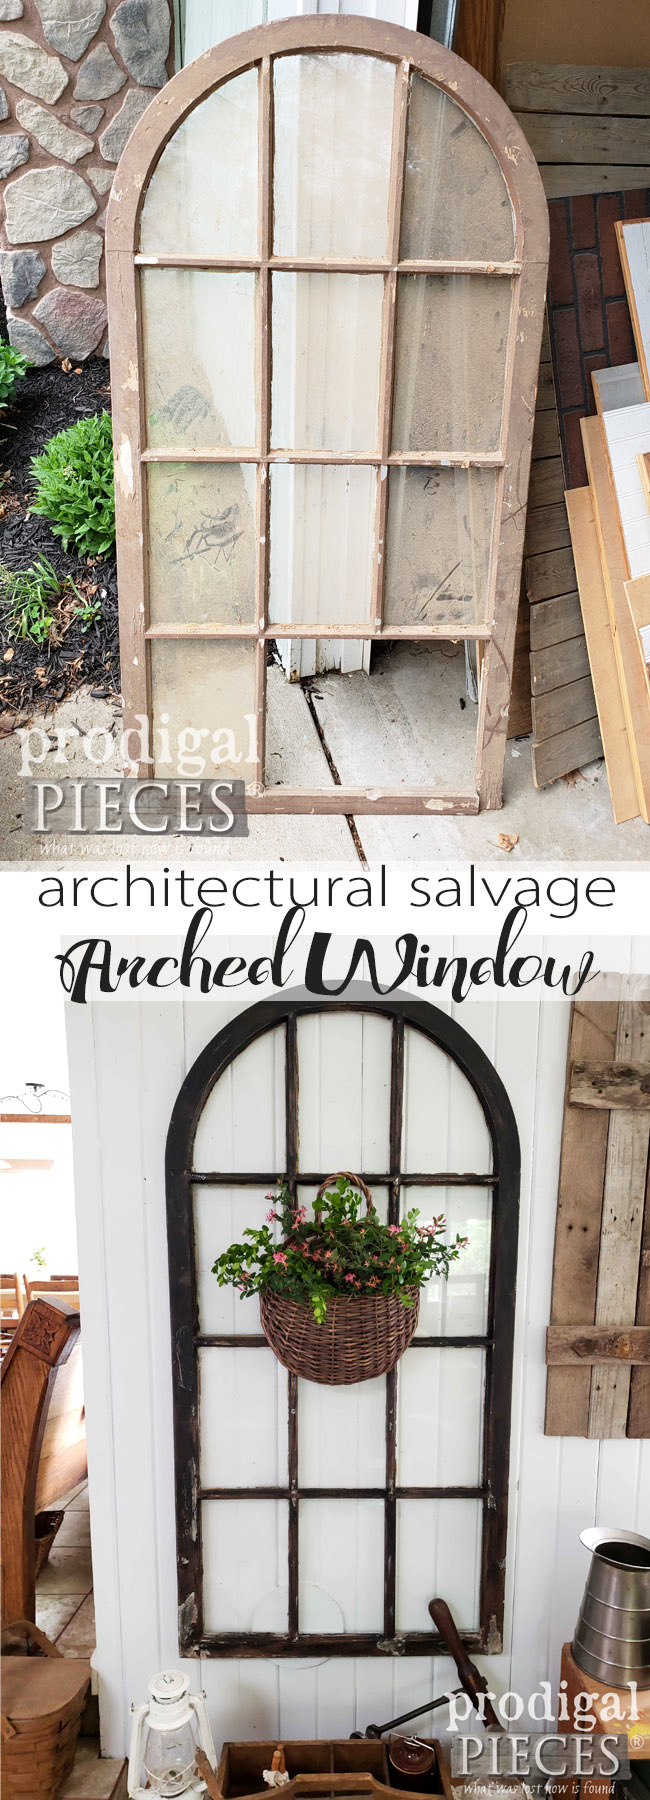 From a curbside find to perfect architectural salvage decor, this arched window is made new. Perfect of farmhouse style decor by Larissa of Prodigal Pieces | prodigalpieces.com